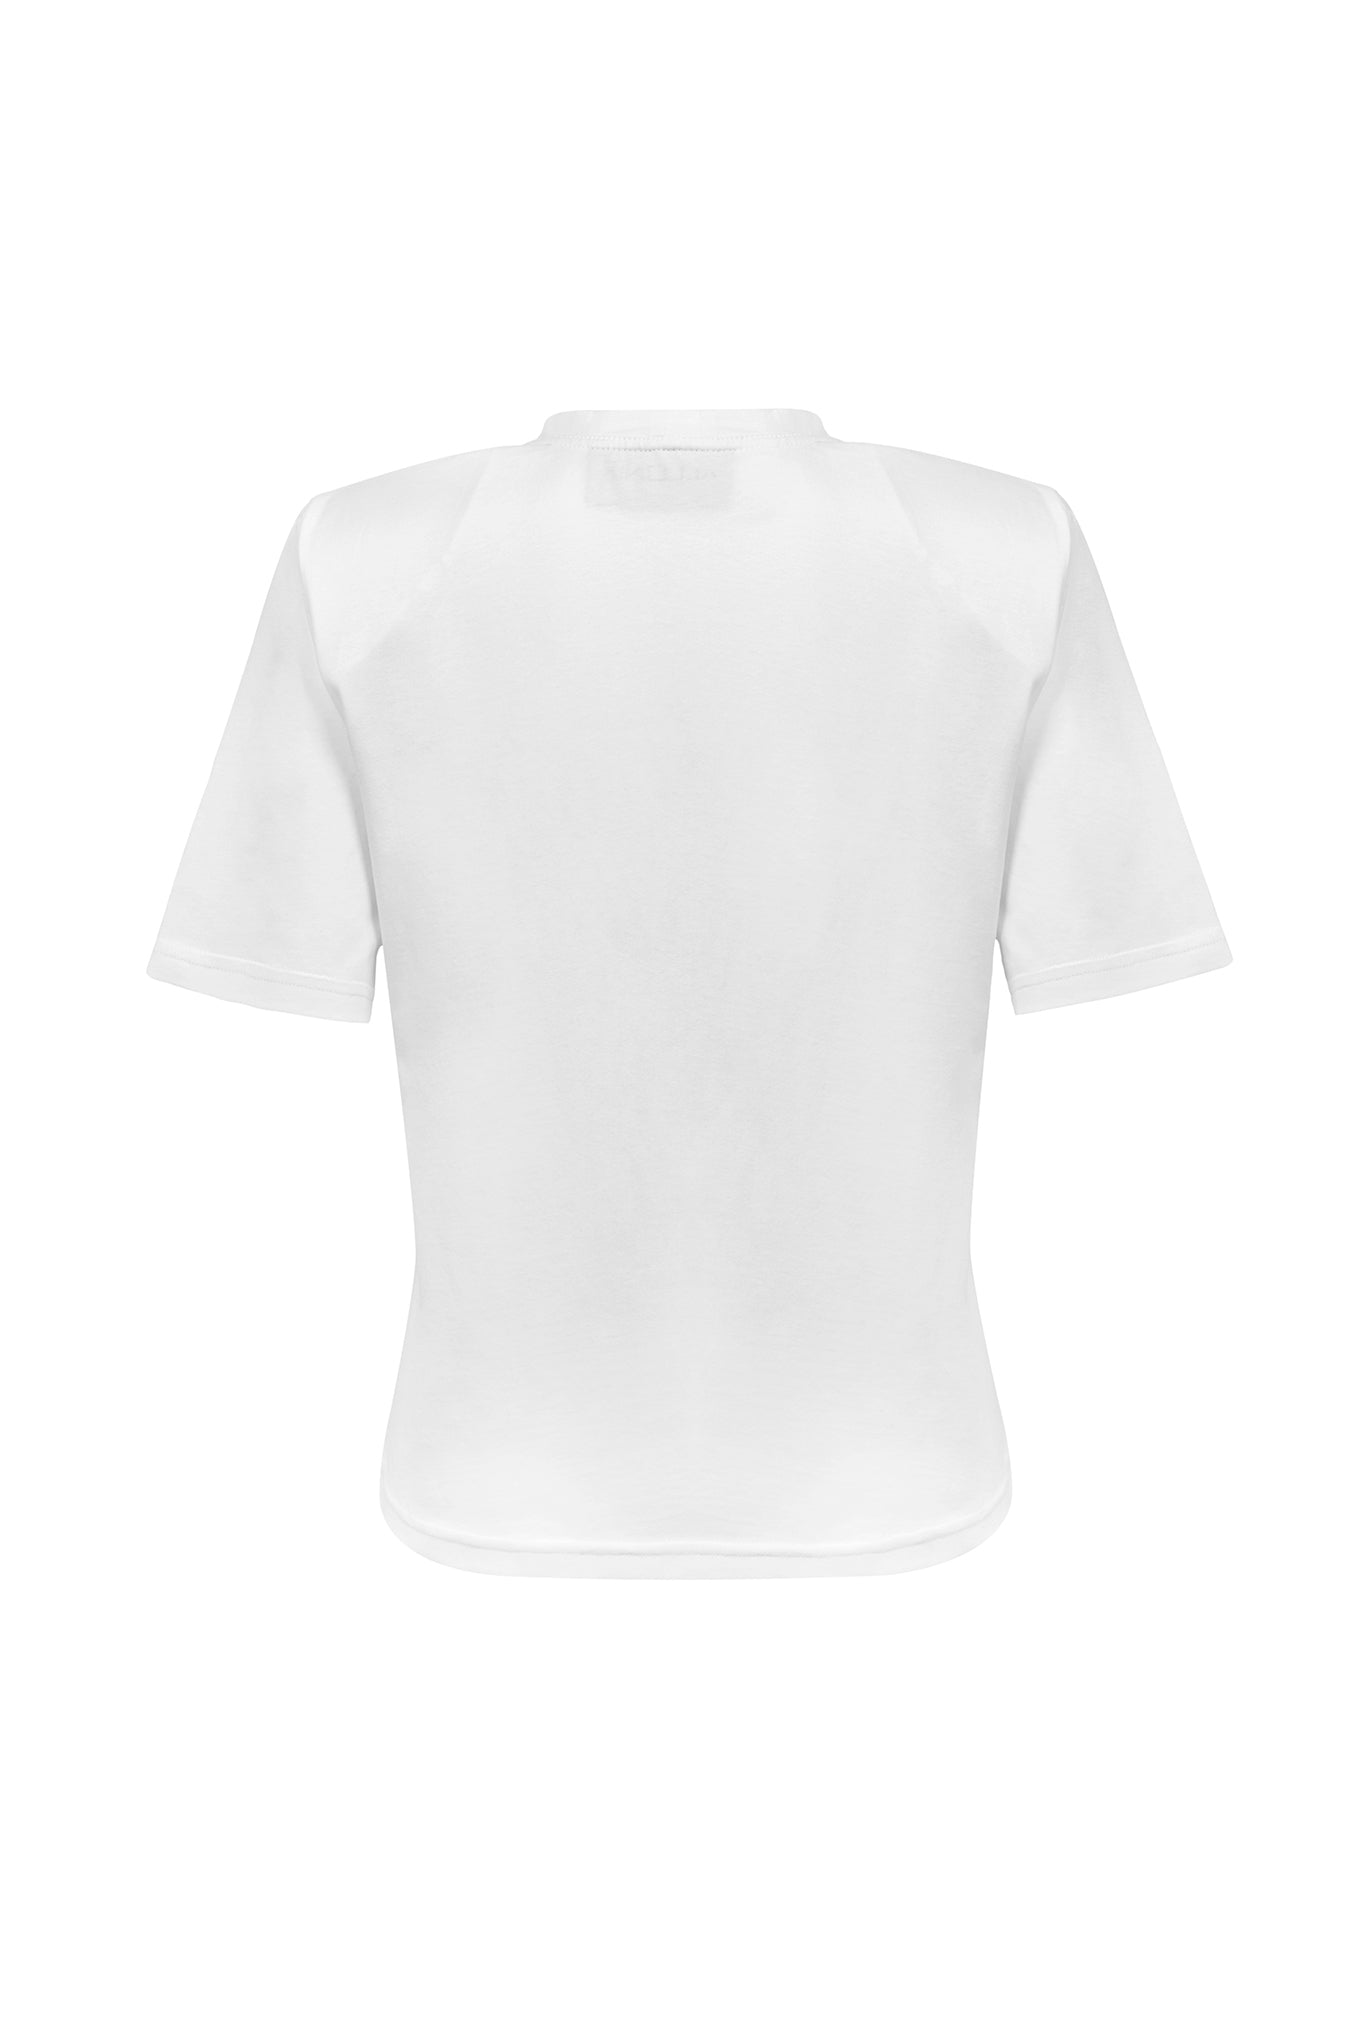 White, oversized silhouette t-shirt with face embroidery in black. The embroidery is in the upper frontal centre of the t-shirt. The fabric is from 100% eco-friendly cotton. It's photographed from the back on white background.